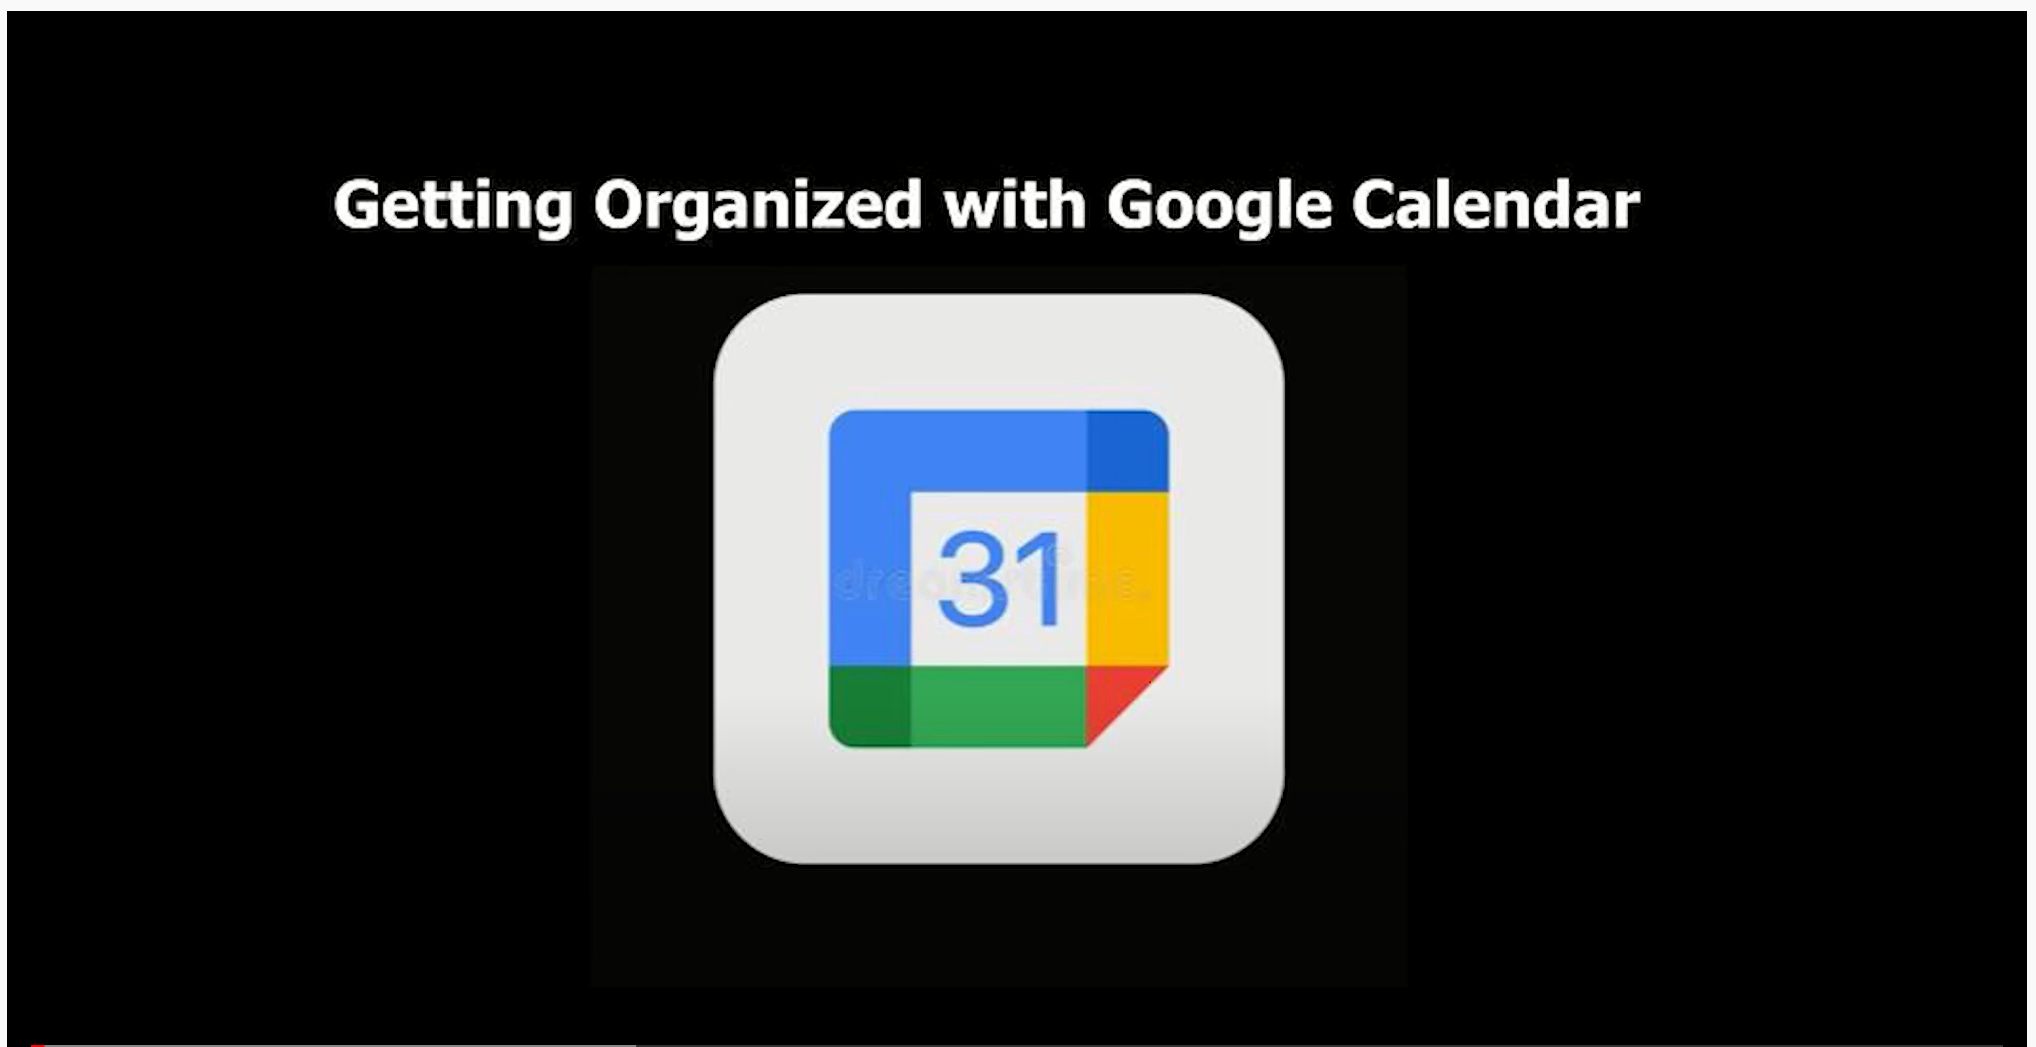 A picture of the Google Calendar app with the words "Getting Organized with Google Calendar"